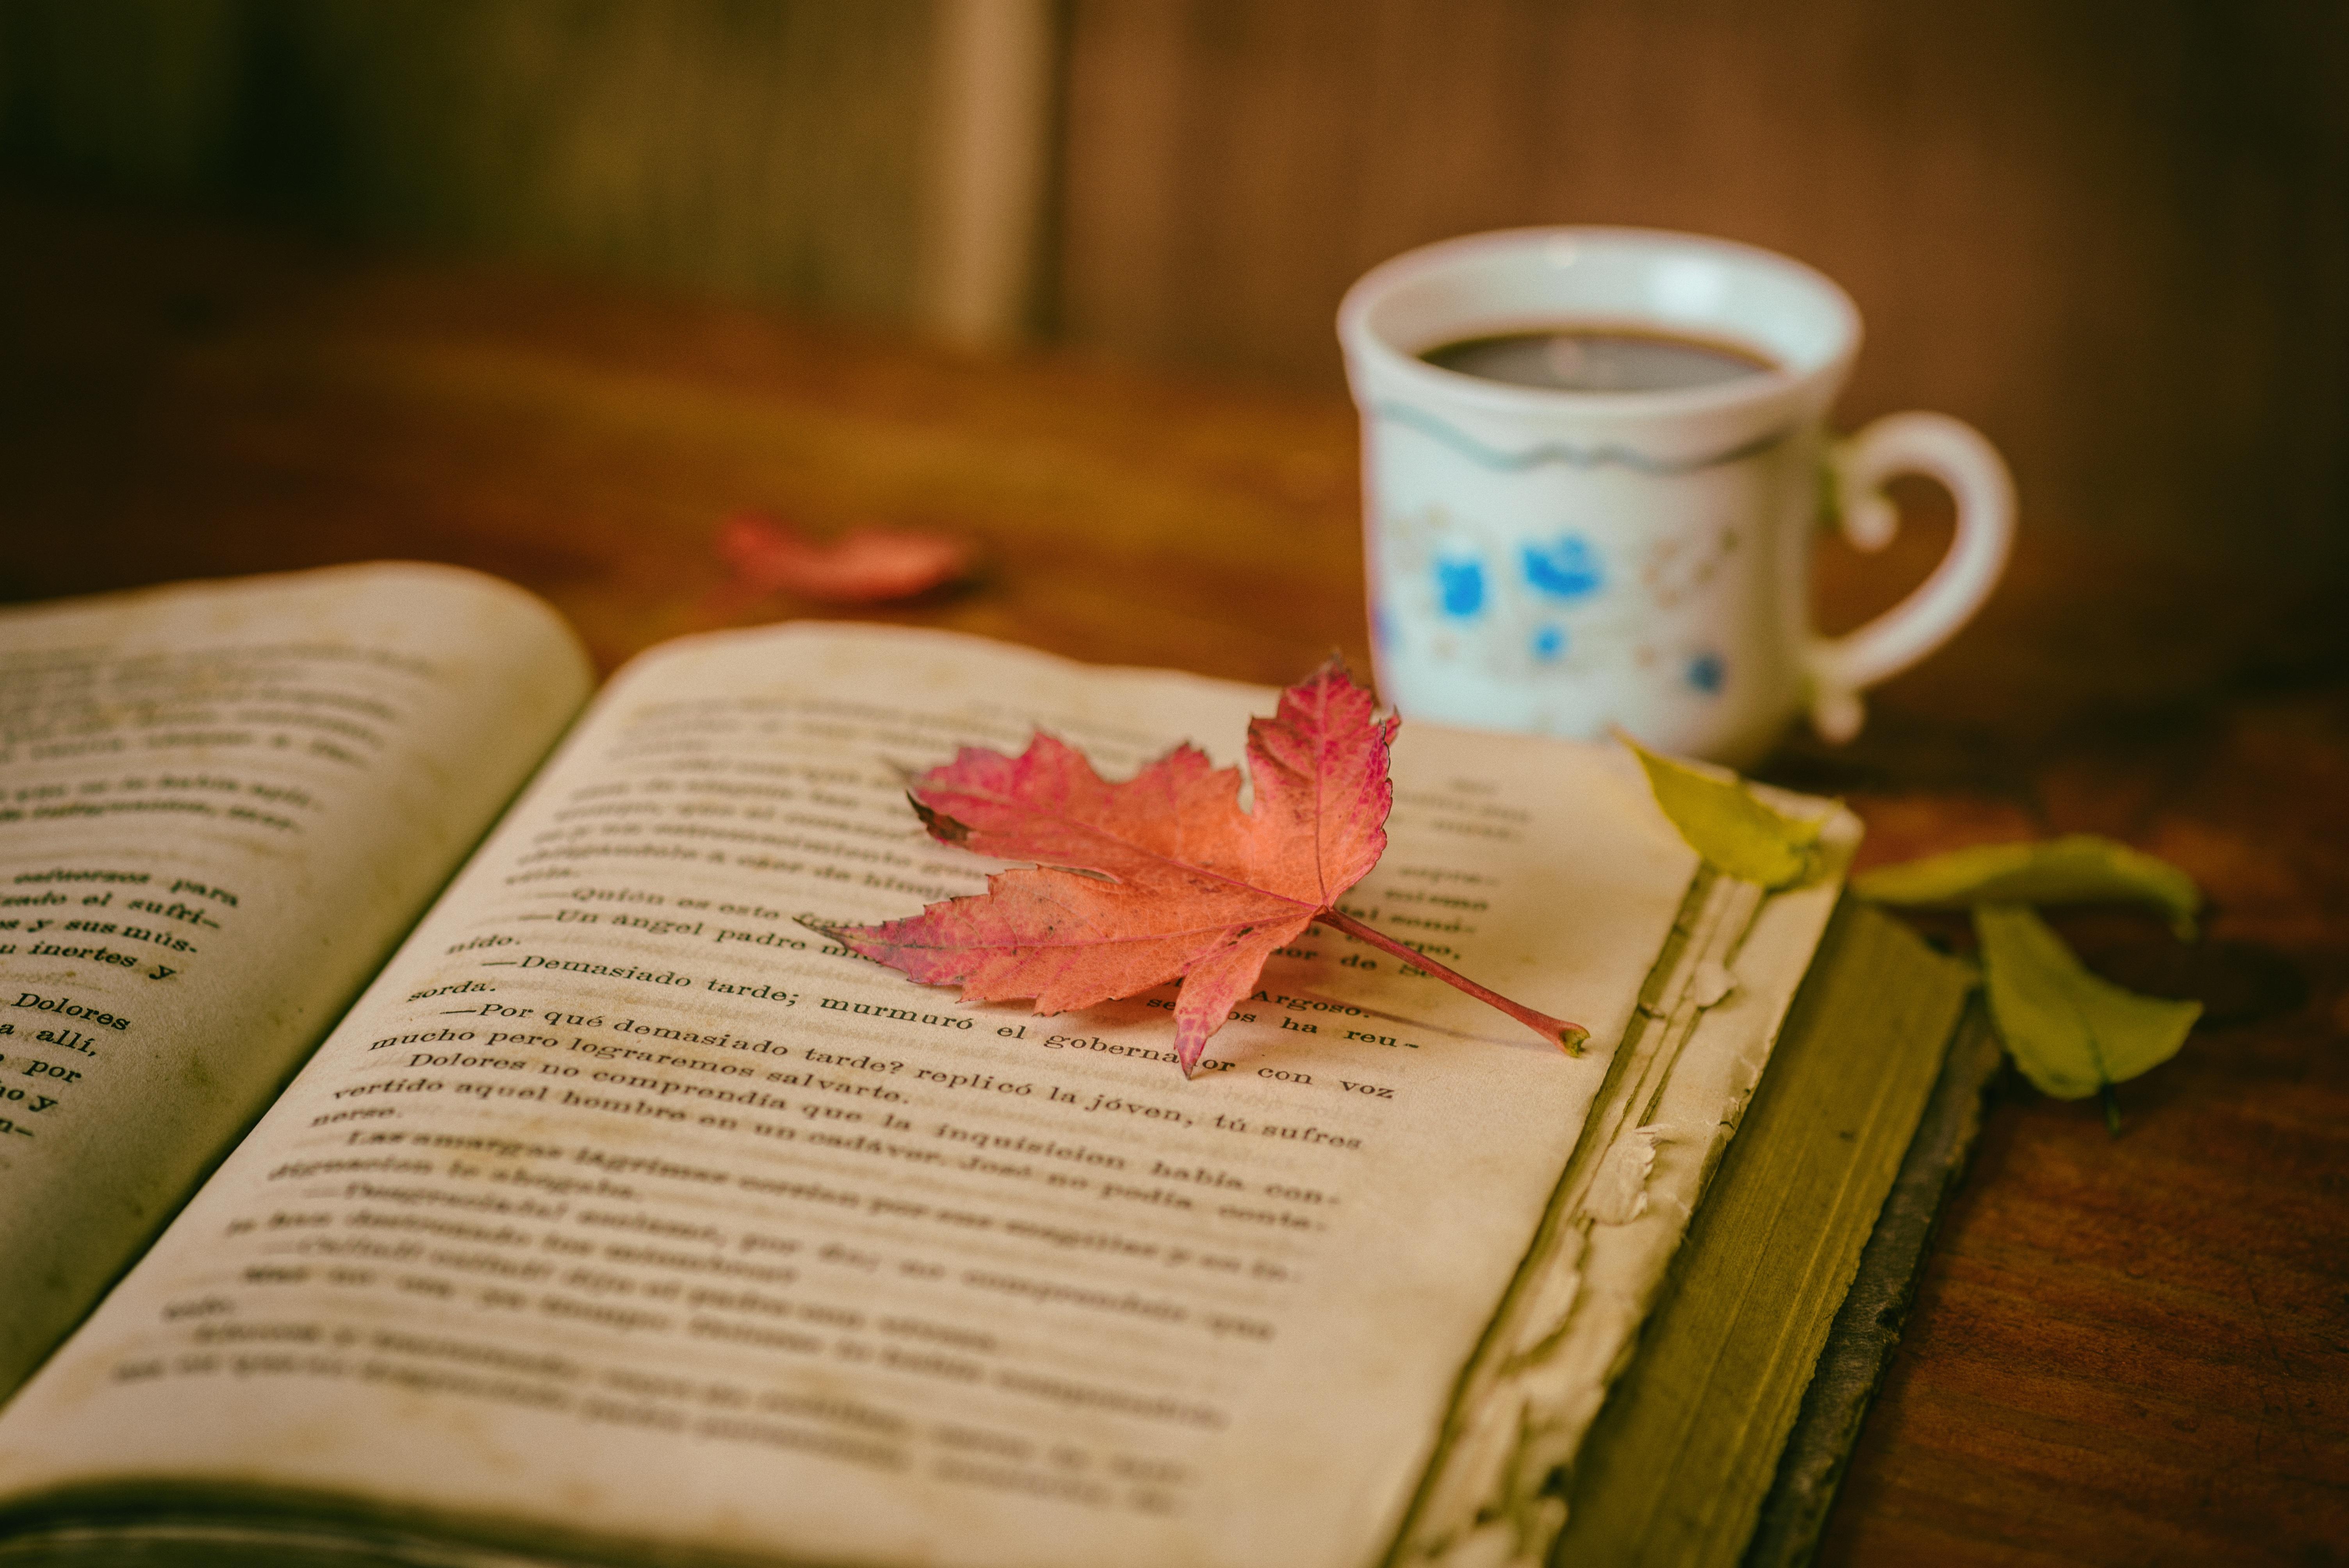 Book, Leaves, Cup, Autumn, Comfort, Reading, Coffee - Books Flower Coffee Photography , HD Wallpaper & Backgrounds